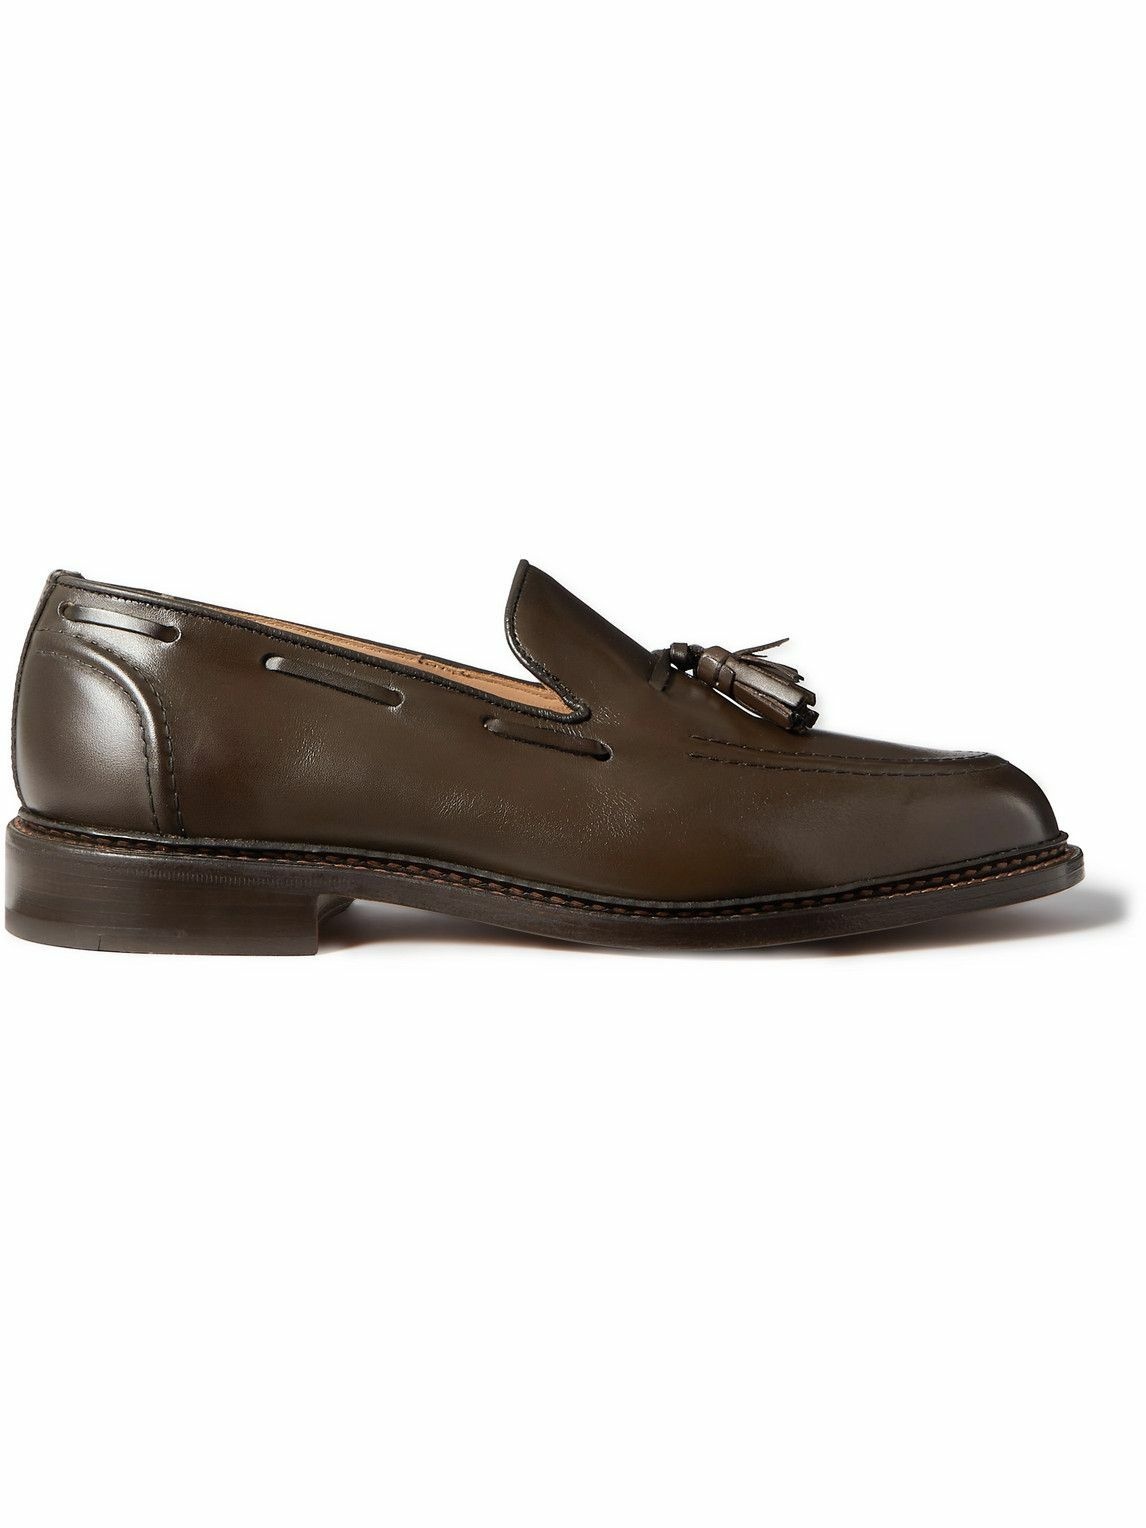 Photo: Tricker's - Elton Tasselled Leather Loafers - Brown